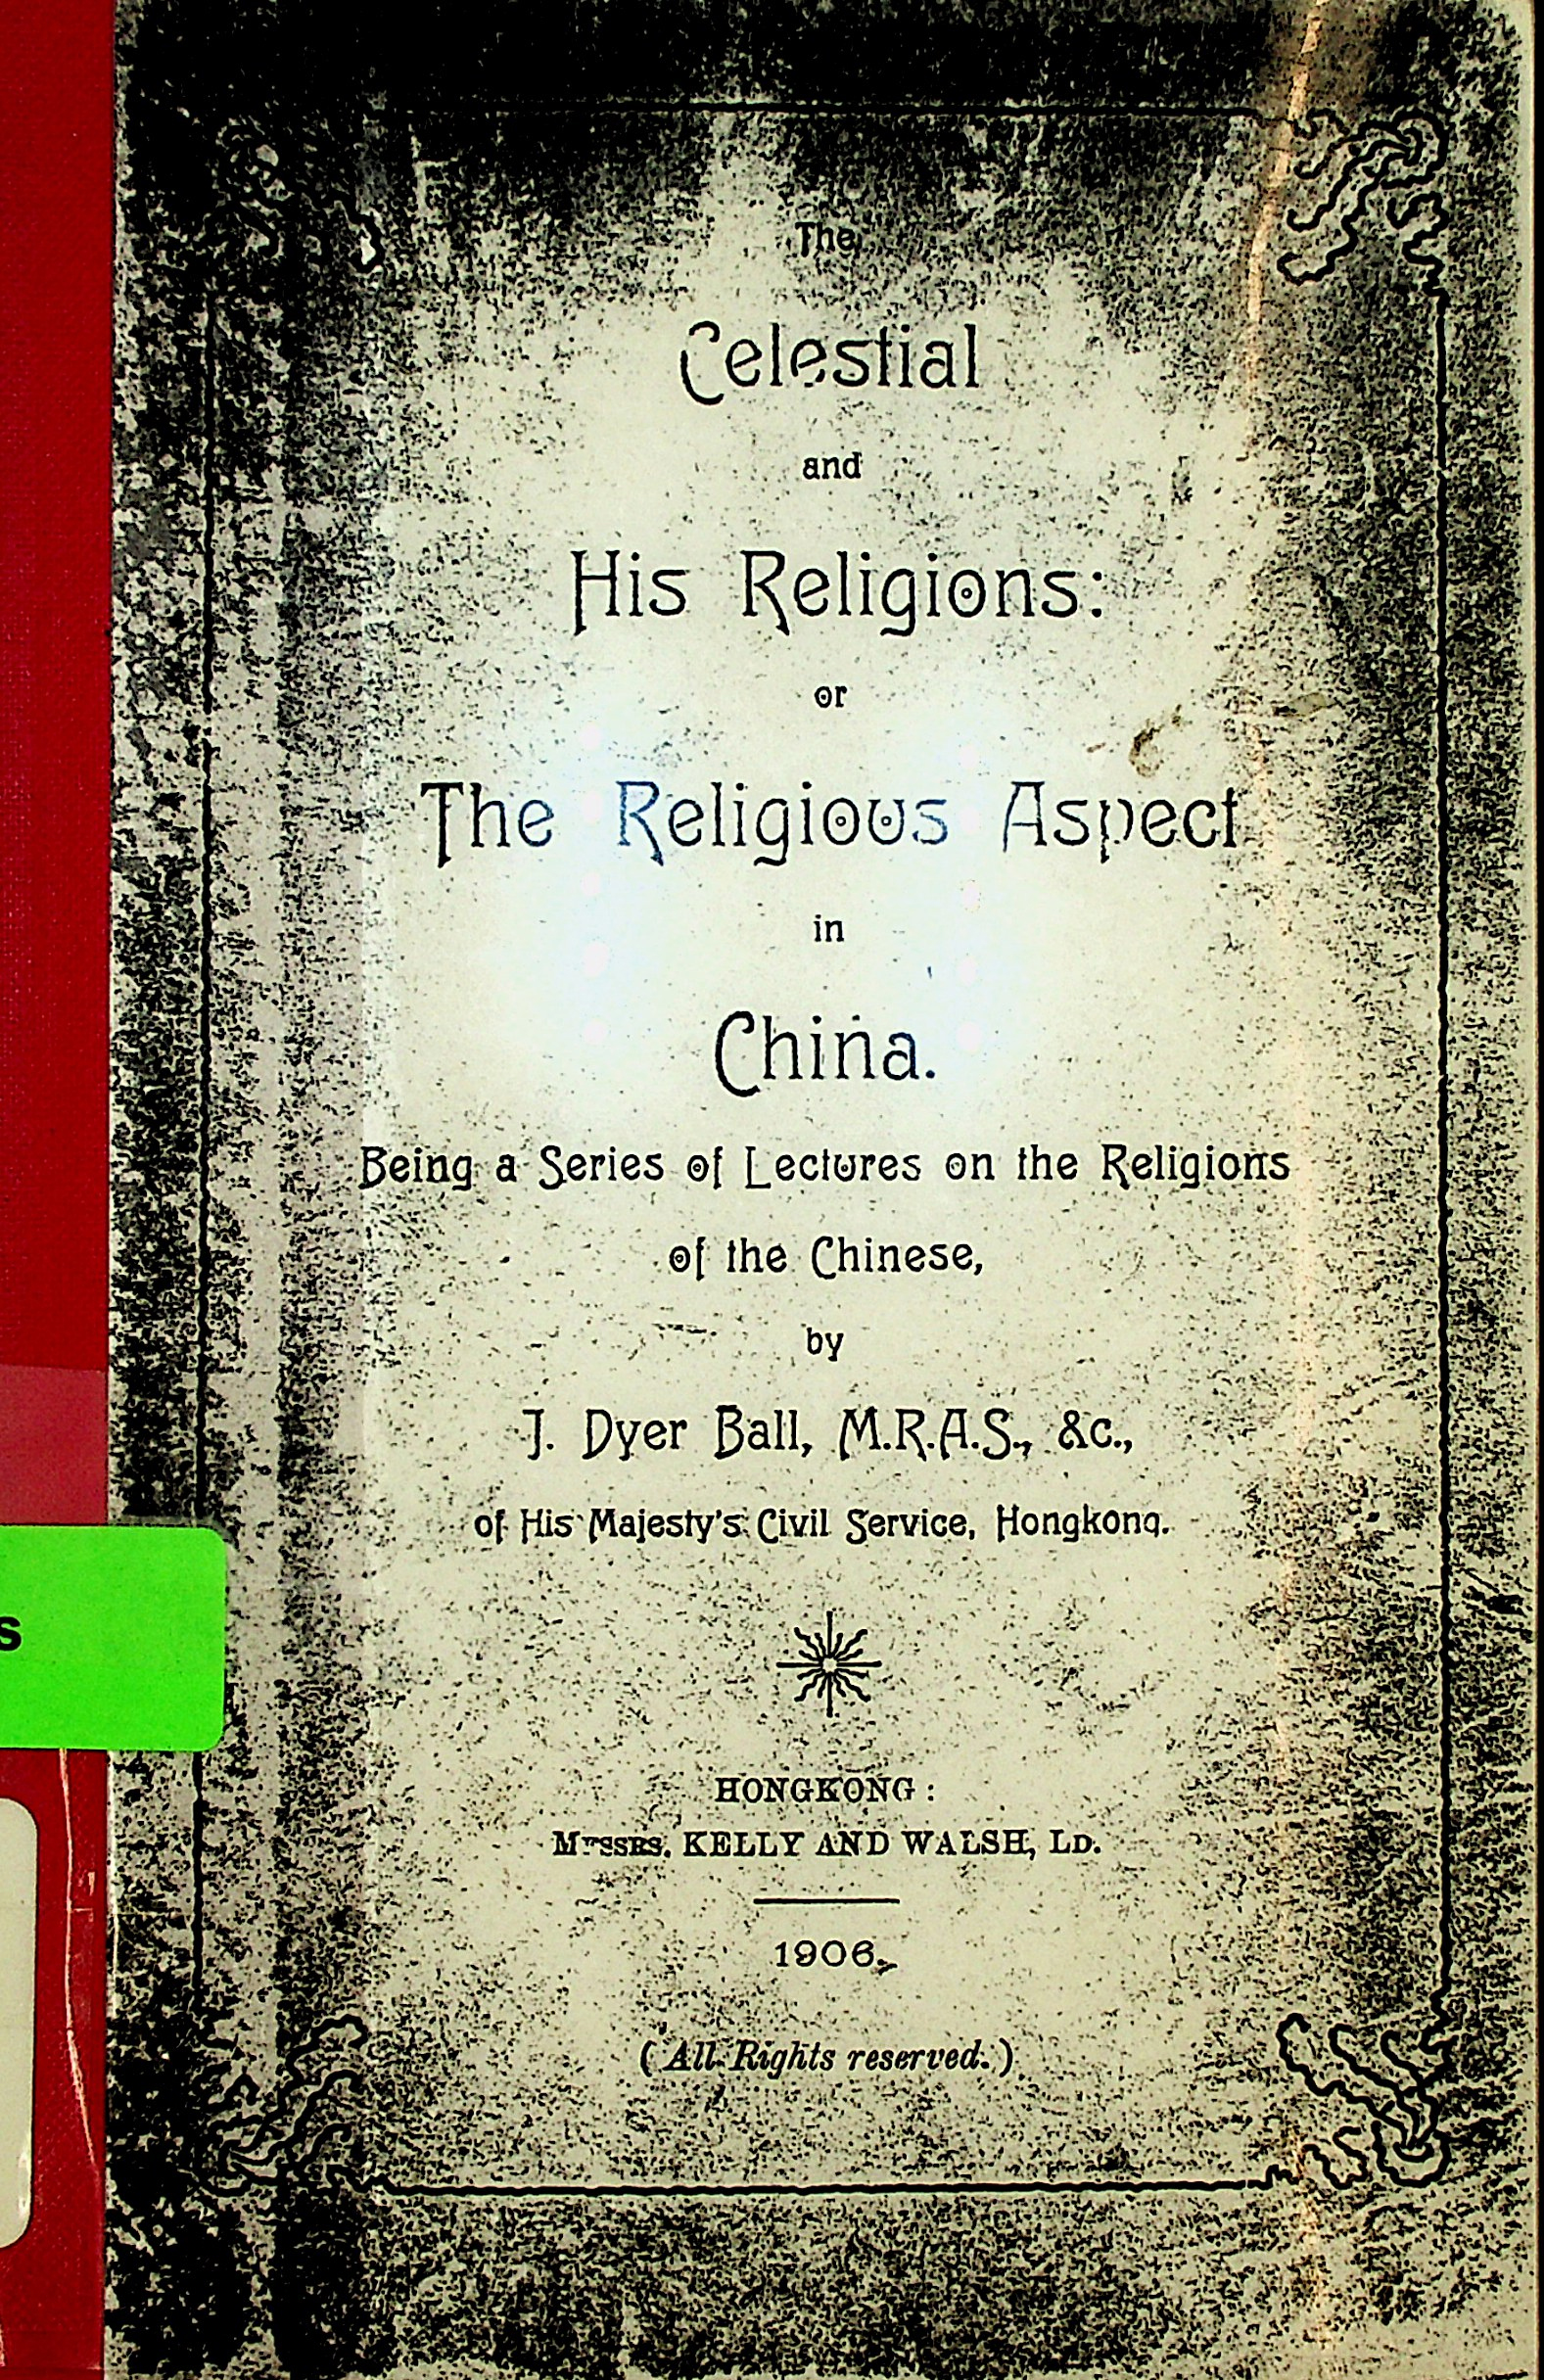 The Celestial and his religions or, the Religious aspect in China : being a series of lectures on the religions of the Chinese 